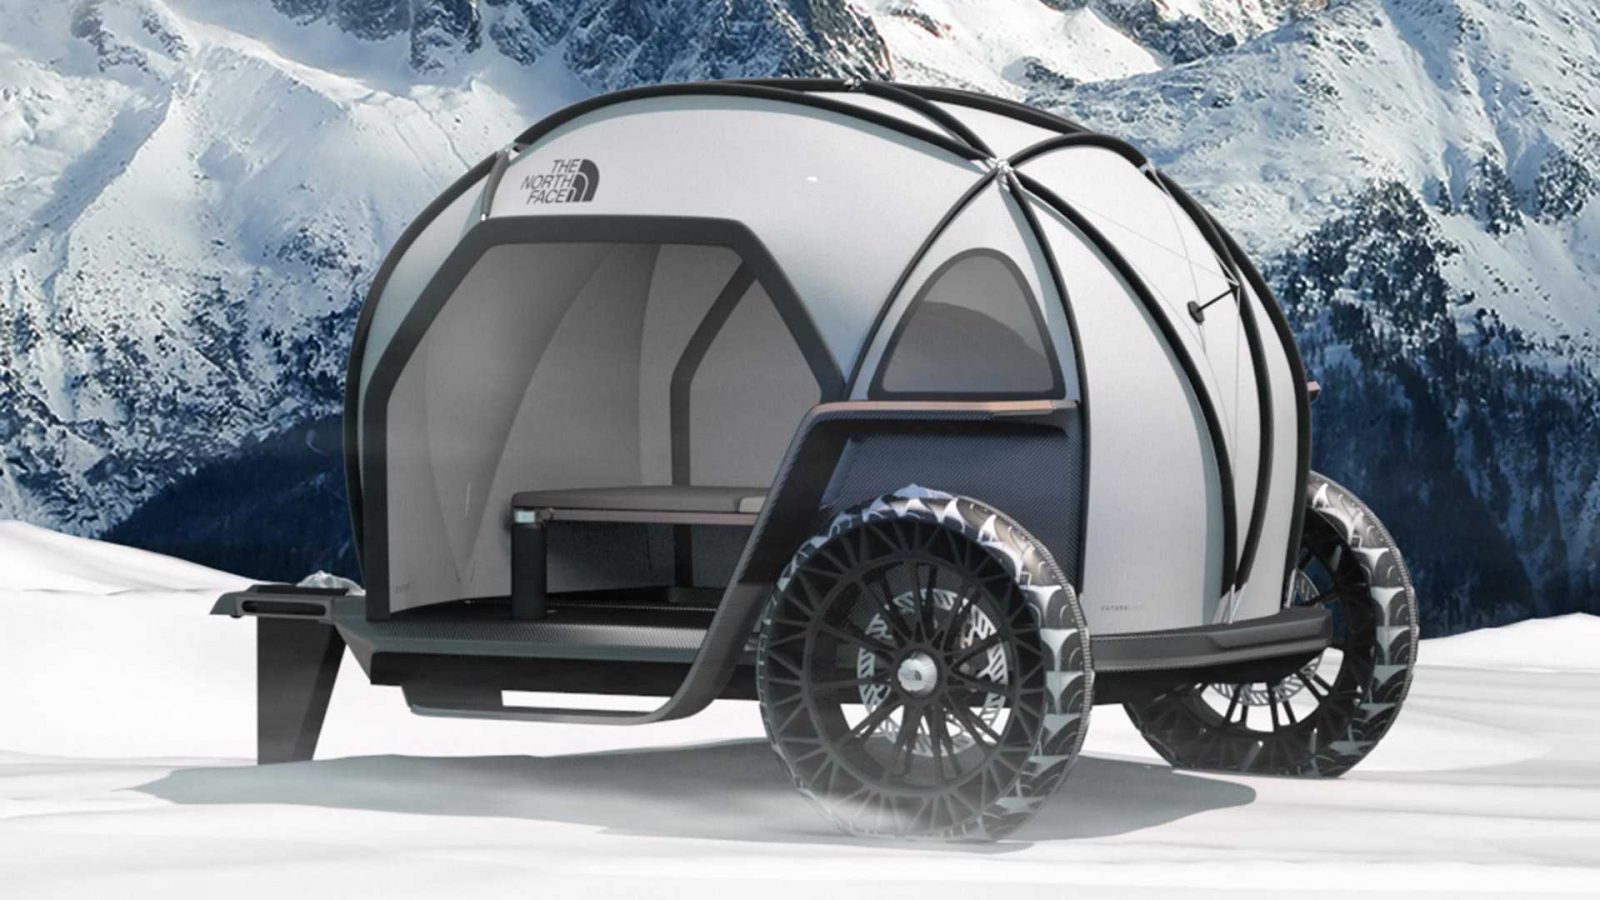 Background image: Bmw and northface futurelight camper concept